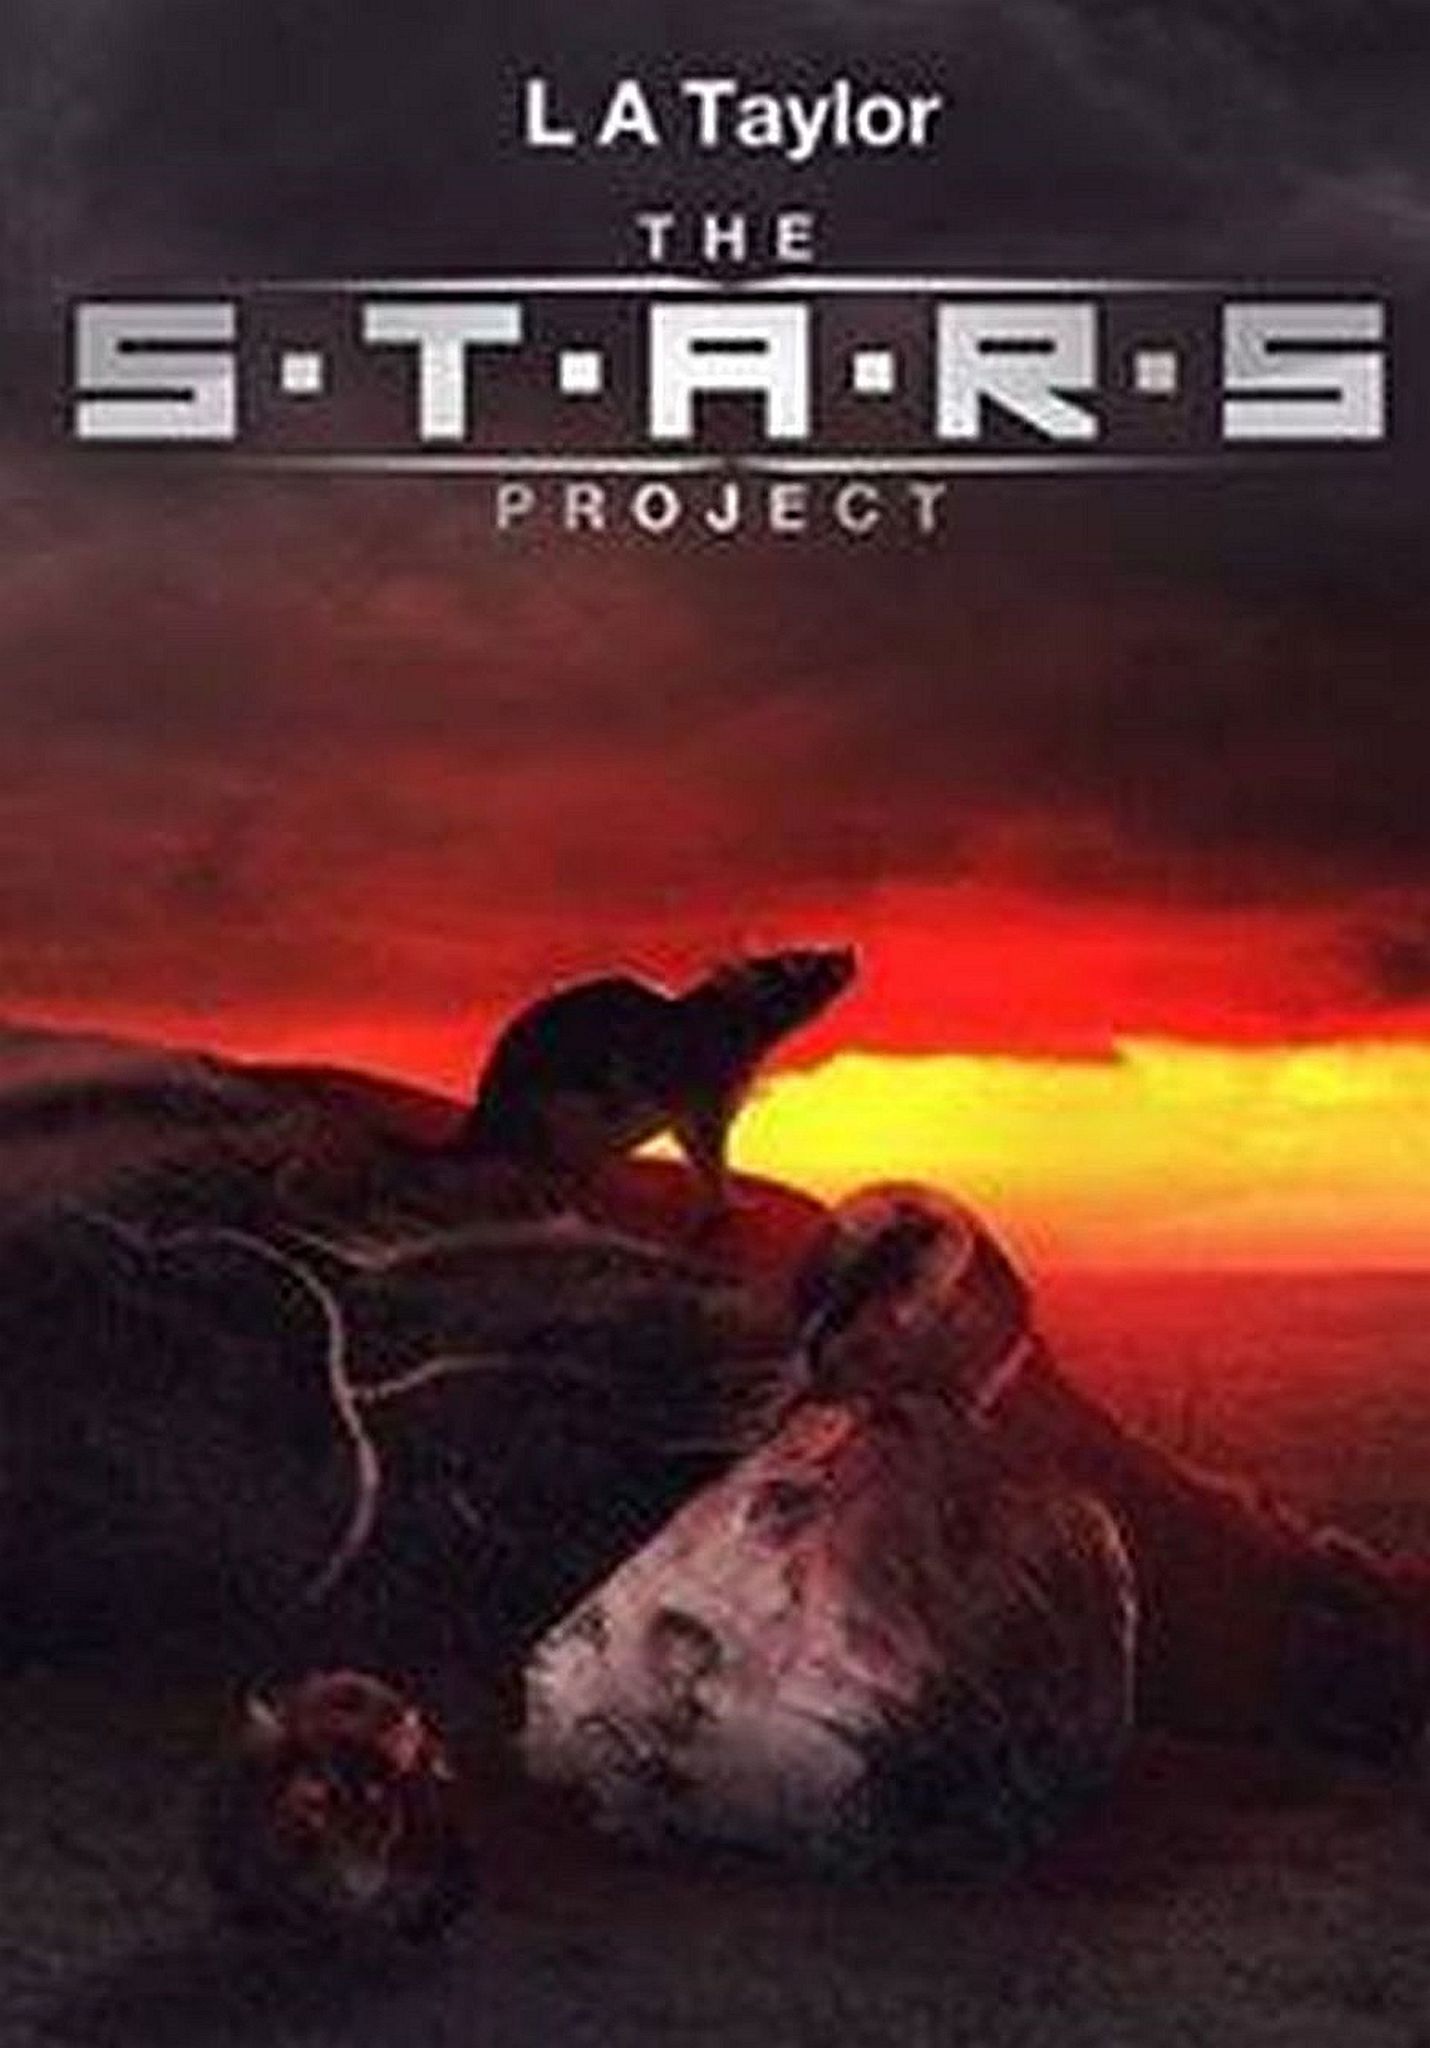 THE S.T.A.R.S PROJECT